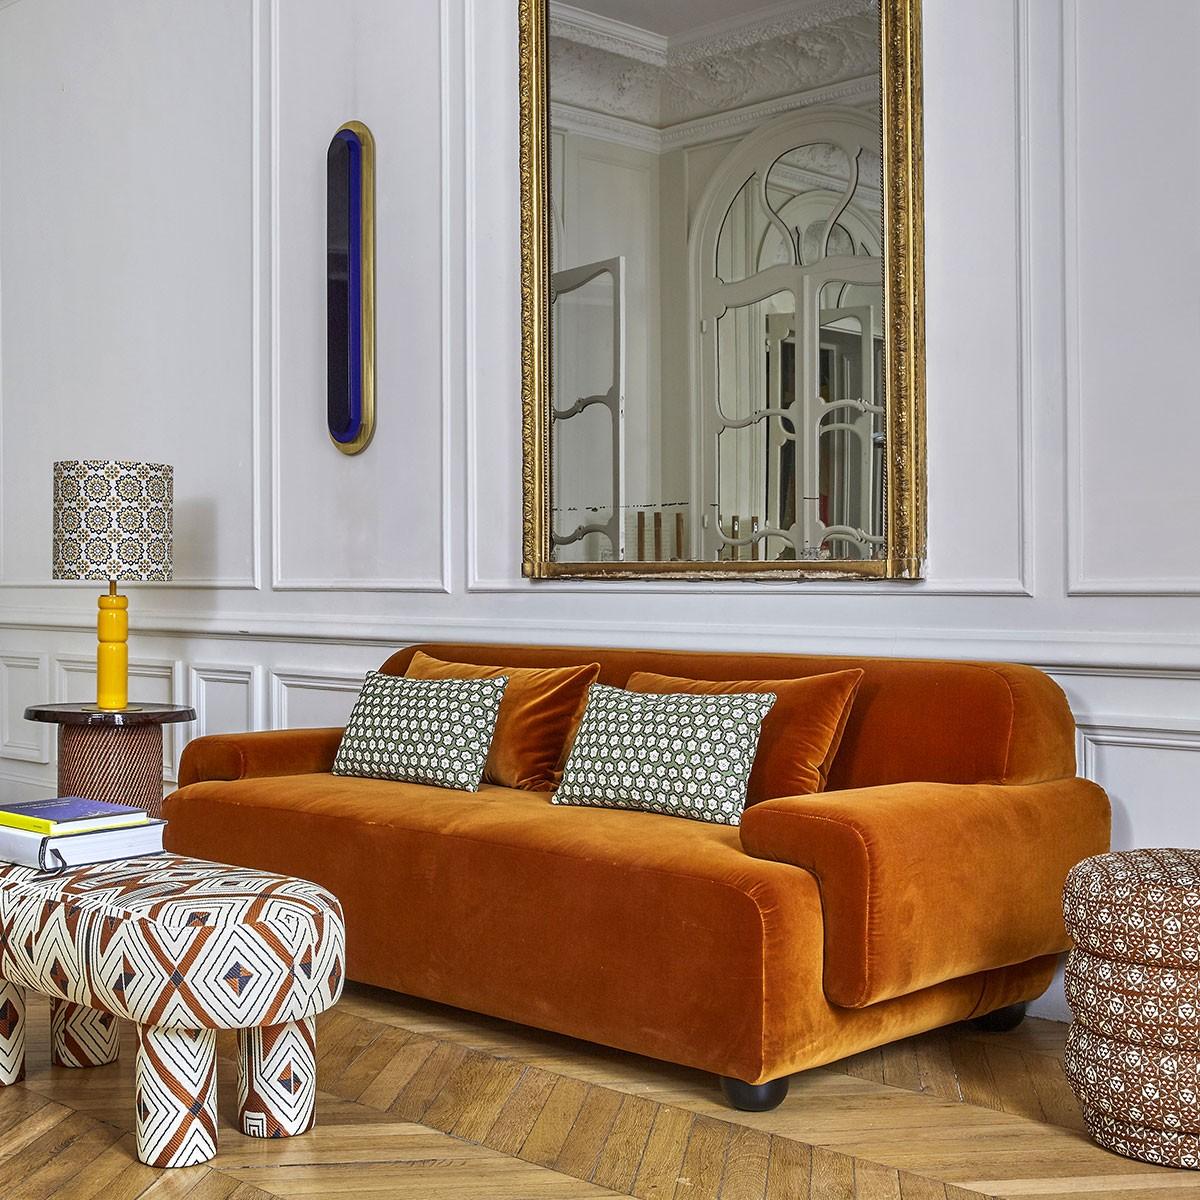 Popus Editions Lena 3 Seater Sofa in Yellow Verone Velvet Upholstery

It looks like it's straight out of a movie, with its generous curves and wide armrests. It is a real invitation to spend long Sundays with the family, comfortably seated in